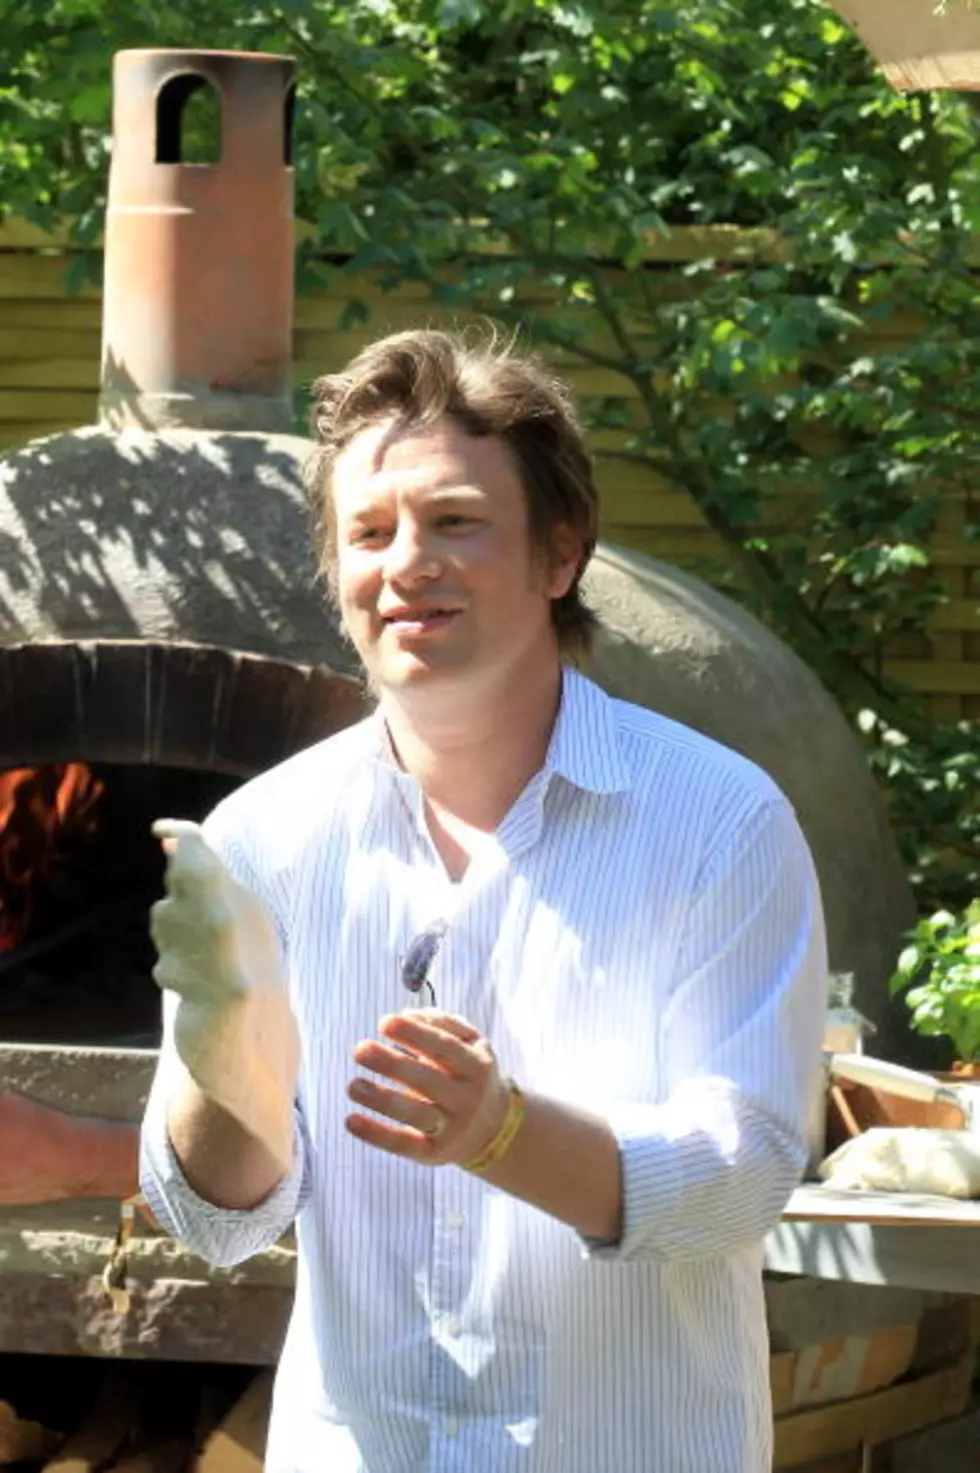 Health-Focused Jamie Oliver’s Cookbook Named One Of 2011’s Most Unhealthy